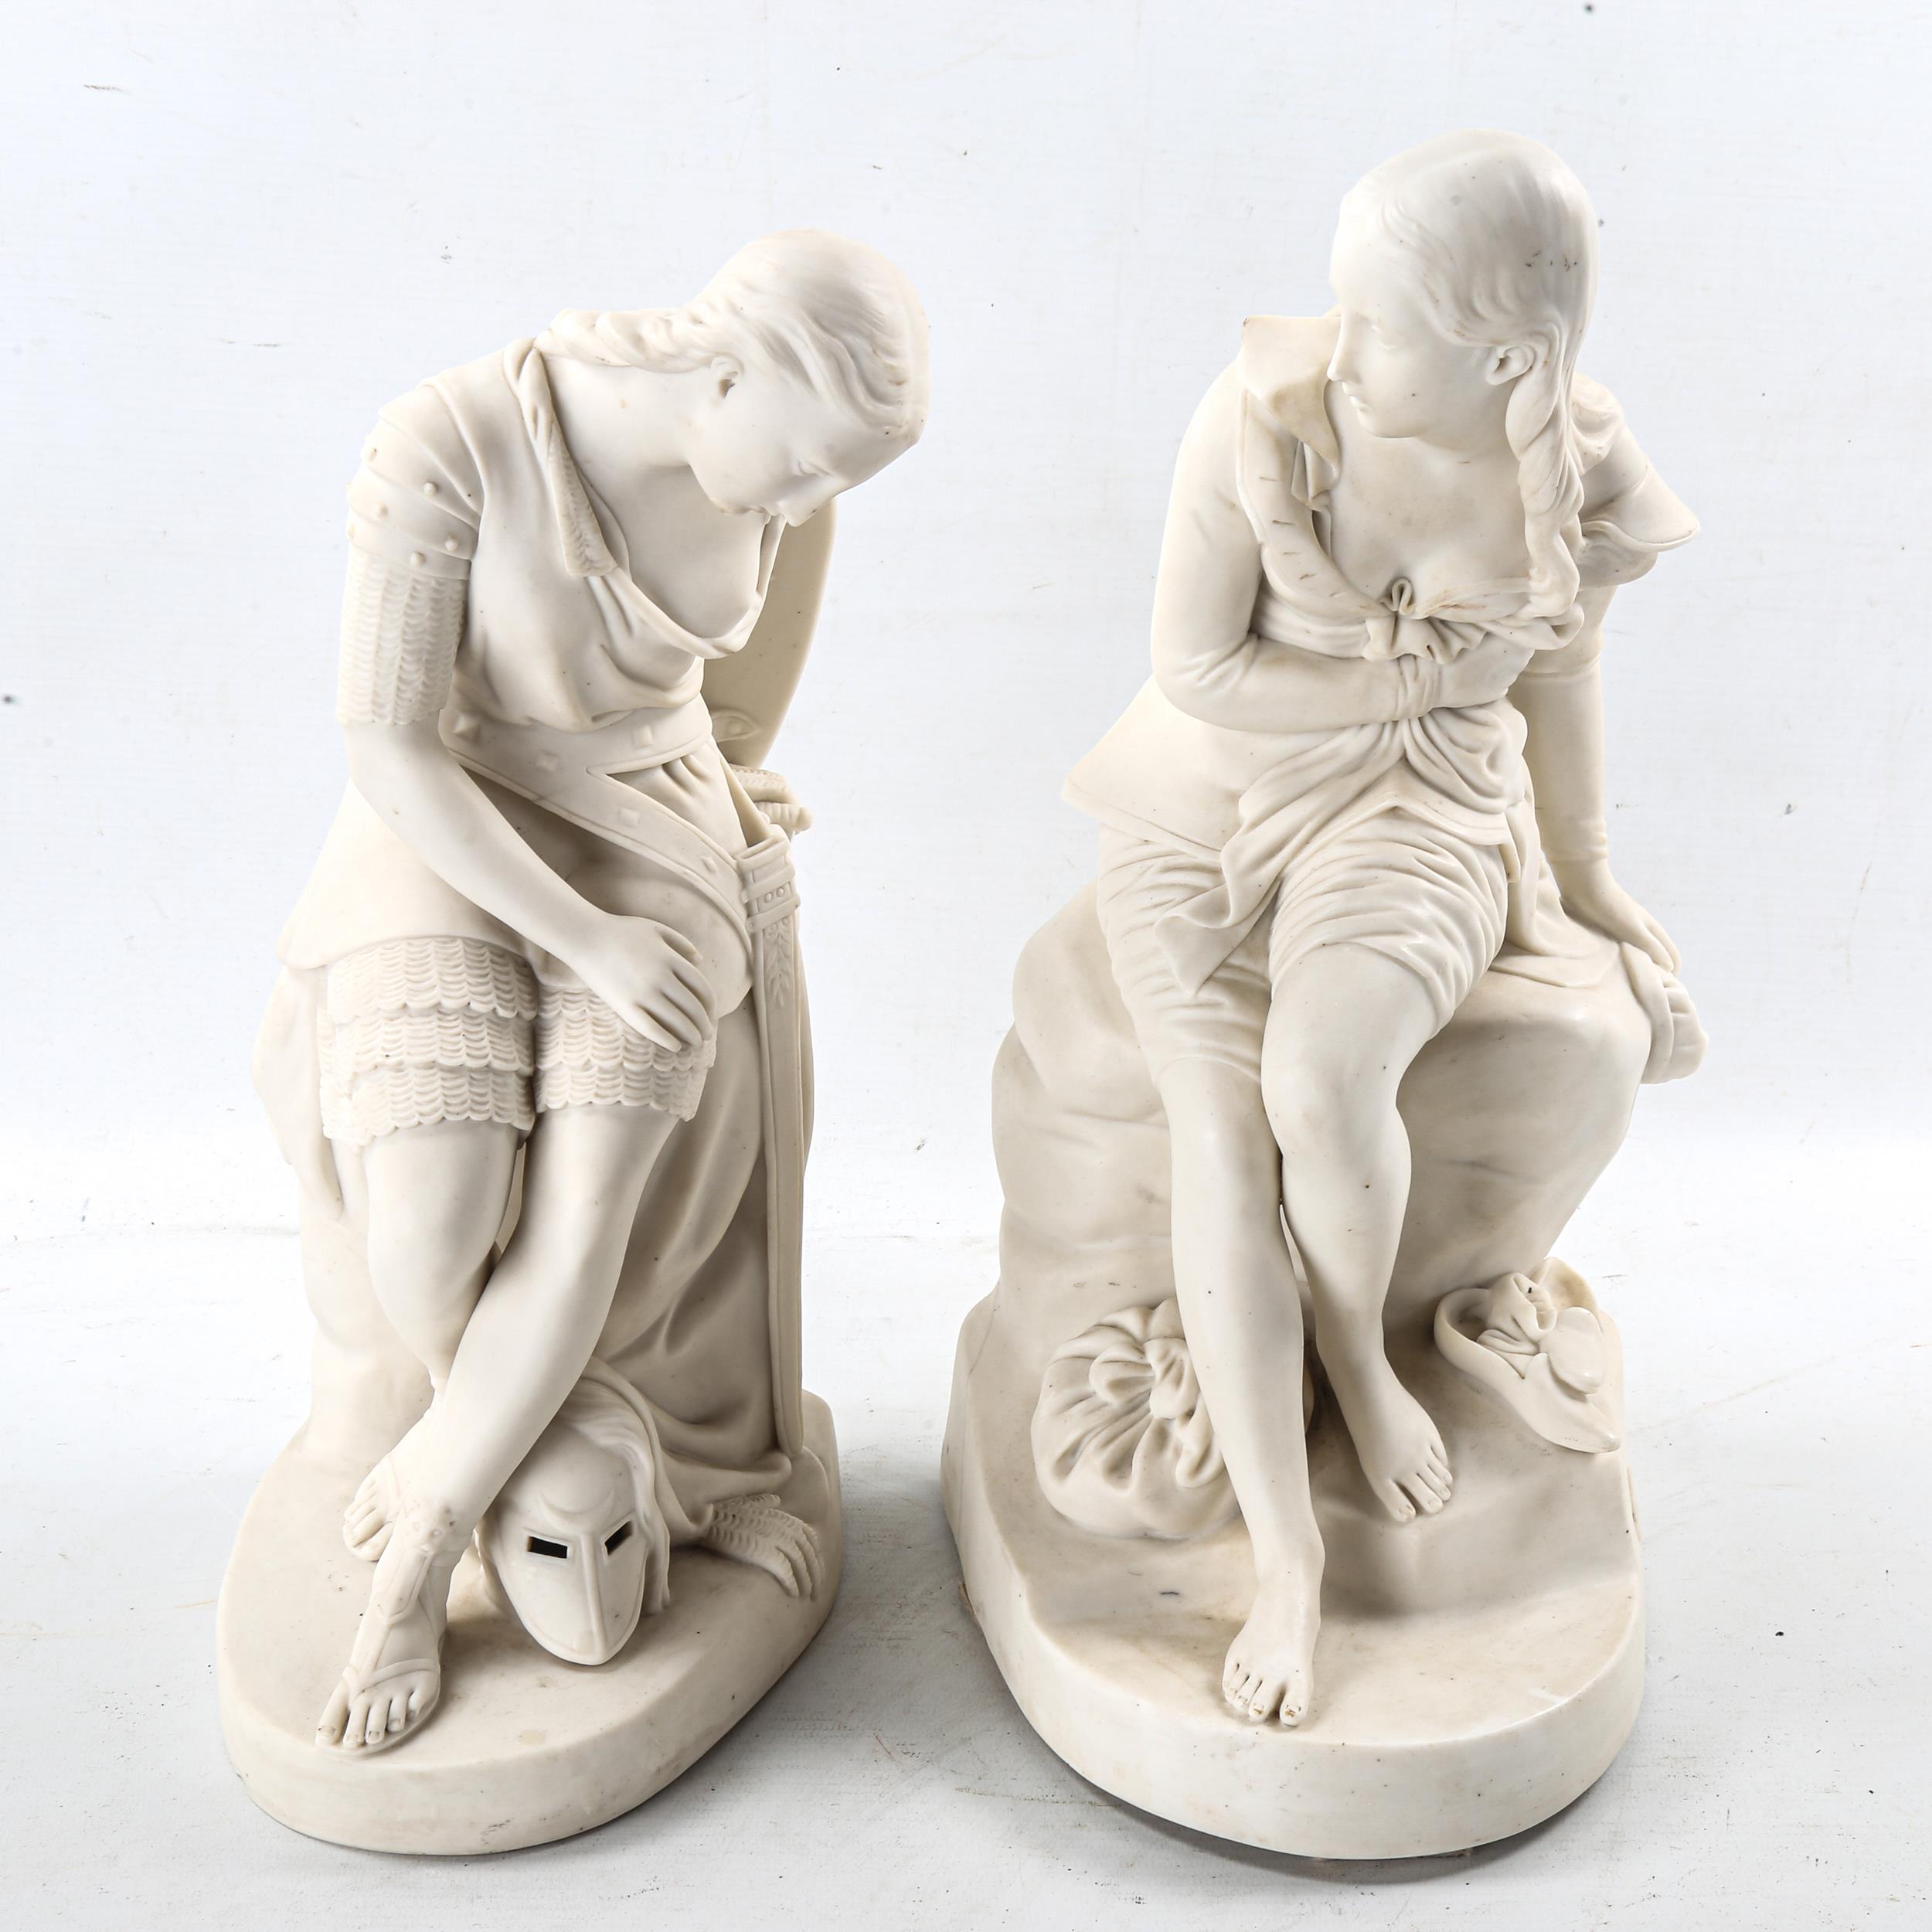 2 similar Minton Parian porcelain Classical figures, modelled by John Bell, height 35cm and 33cm